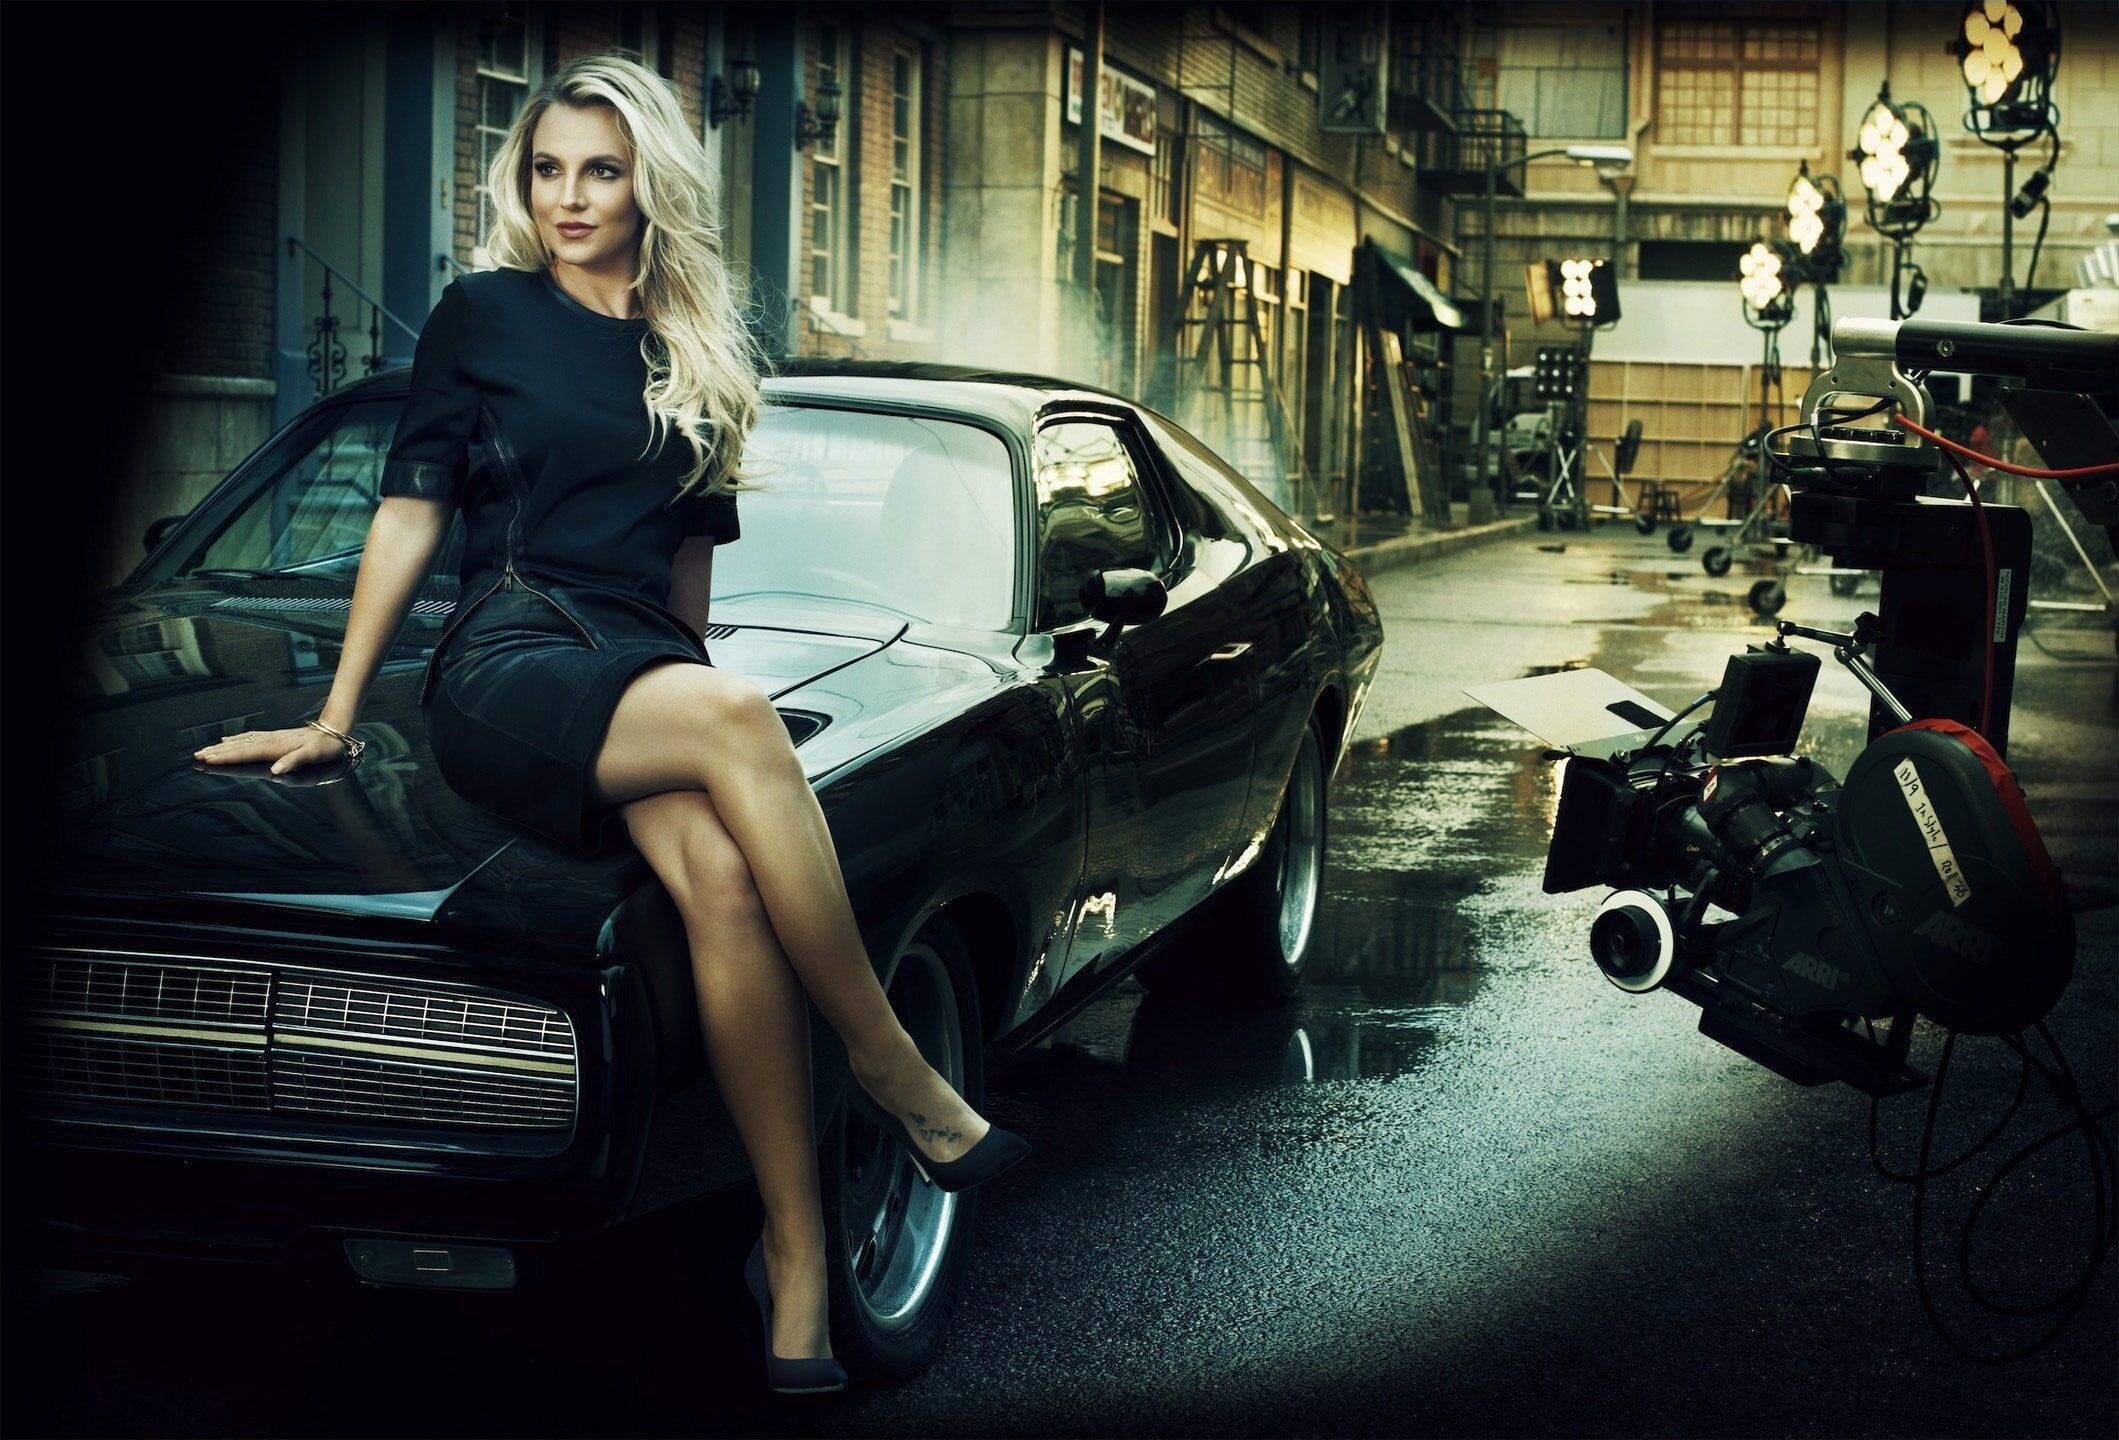 Girls and Muscle Cars: Britney Spears, An American singer, The filmmaking process, Black retro car. 2120x1440 HD Wallpaper.